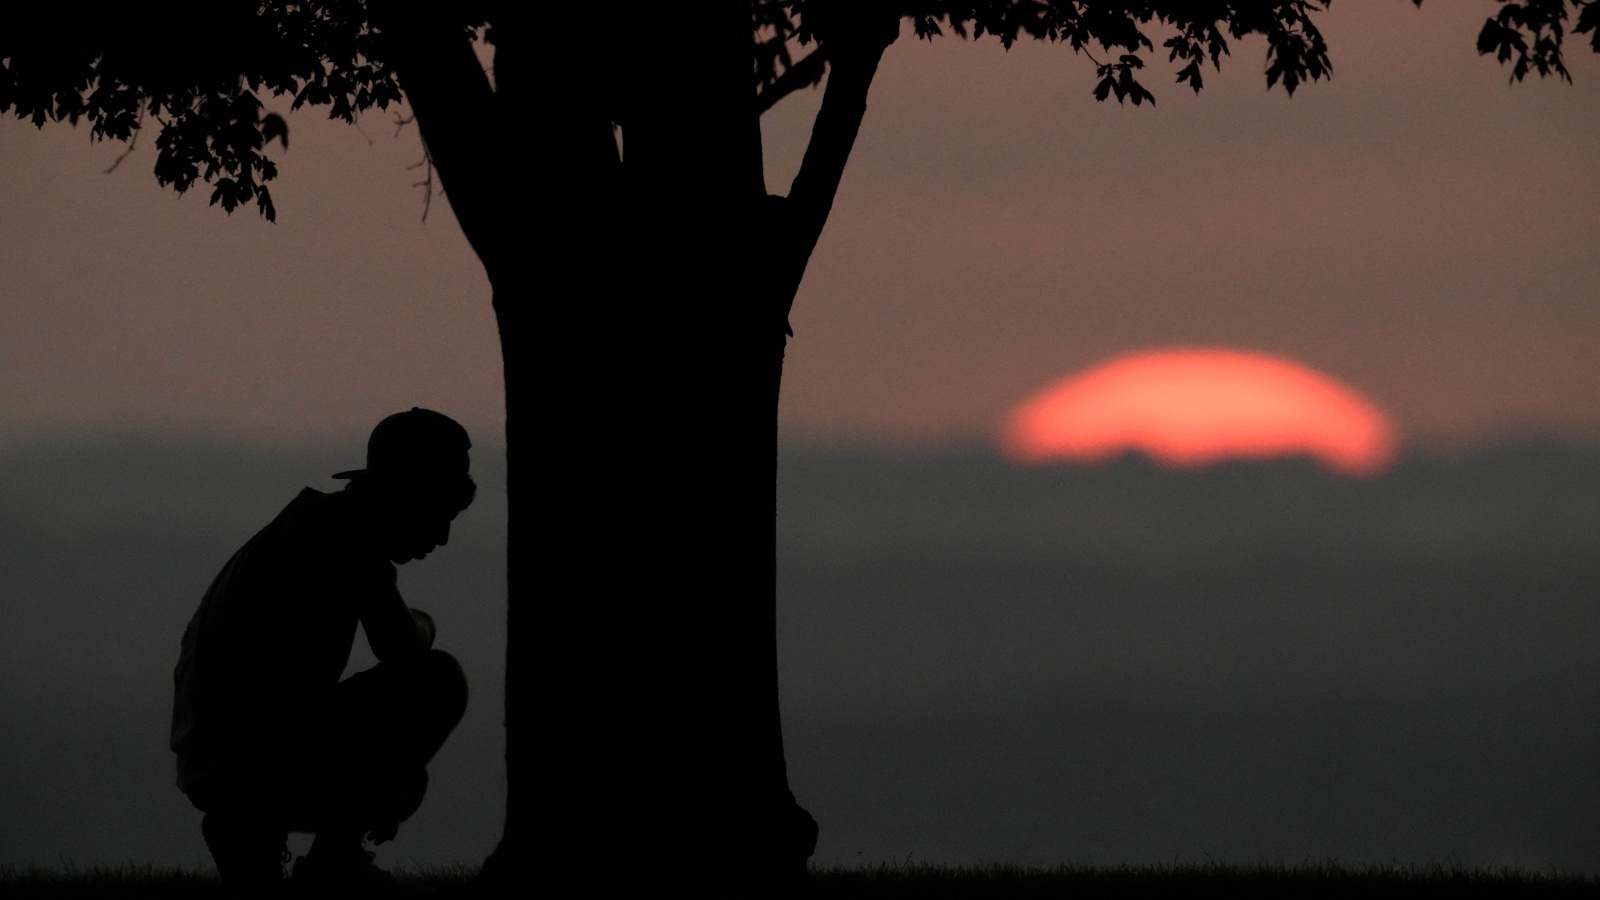 A person kneels beneath a tree as the sun dips below the horizon after a hot day in Missouri.